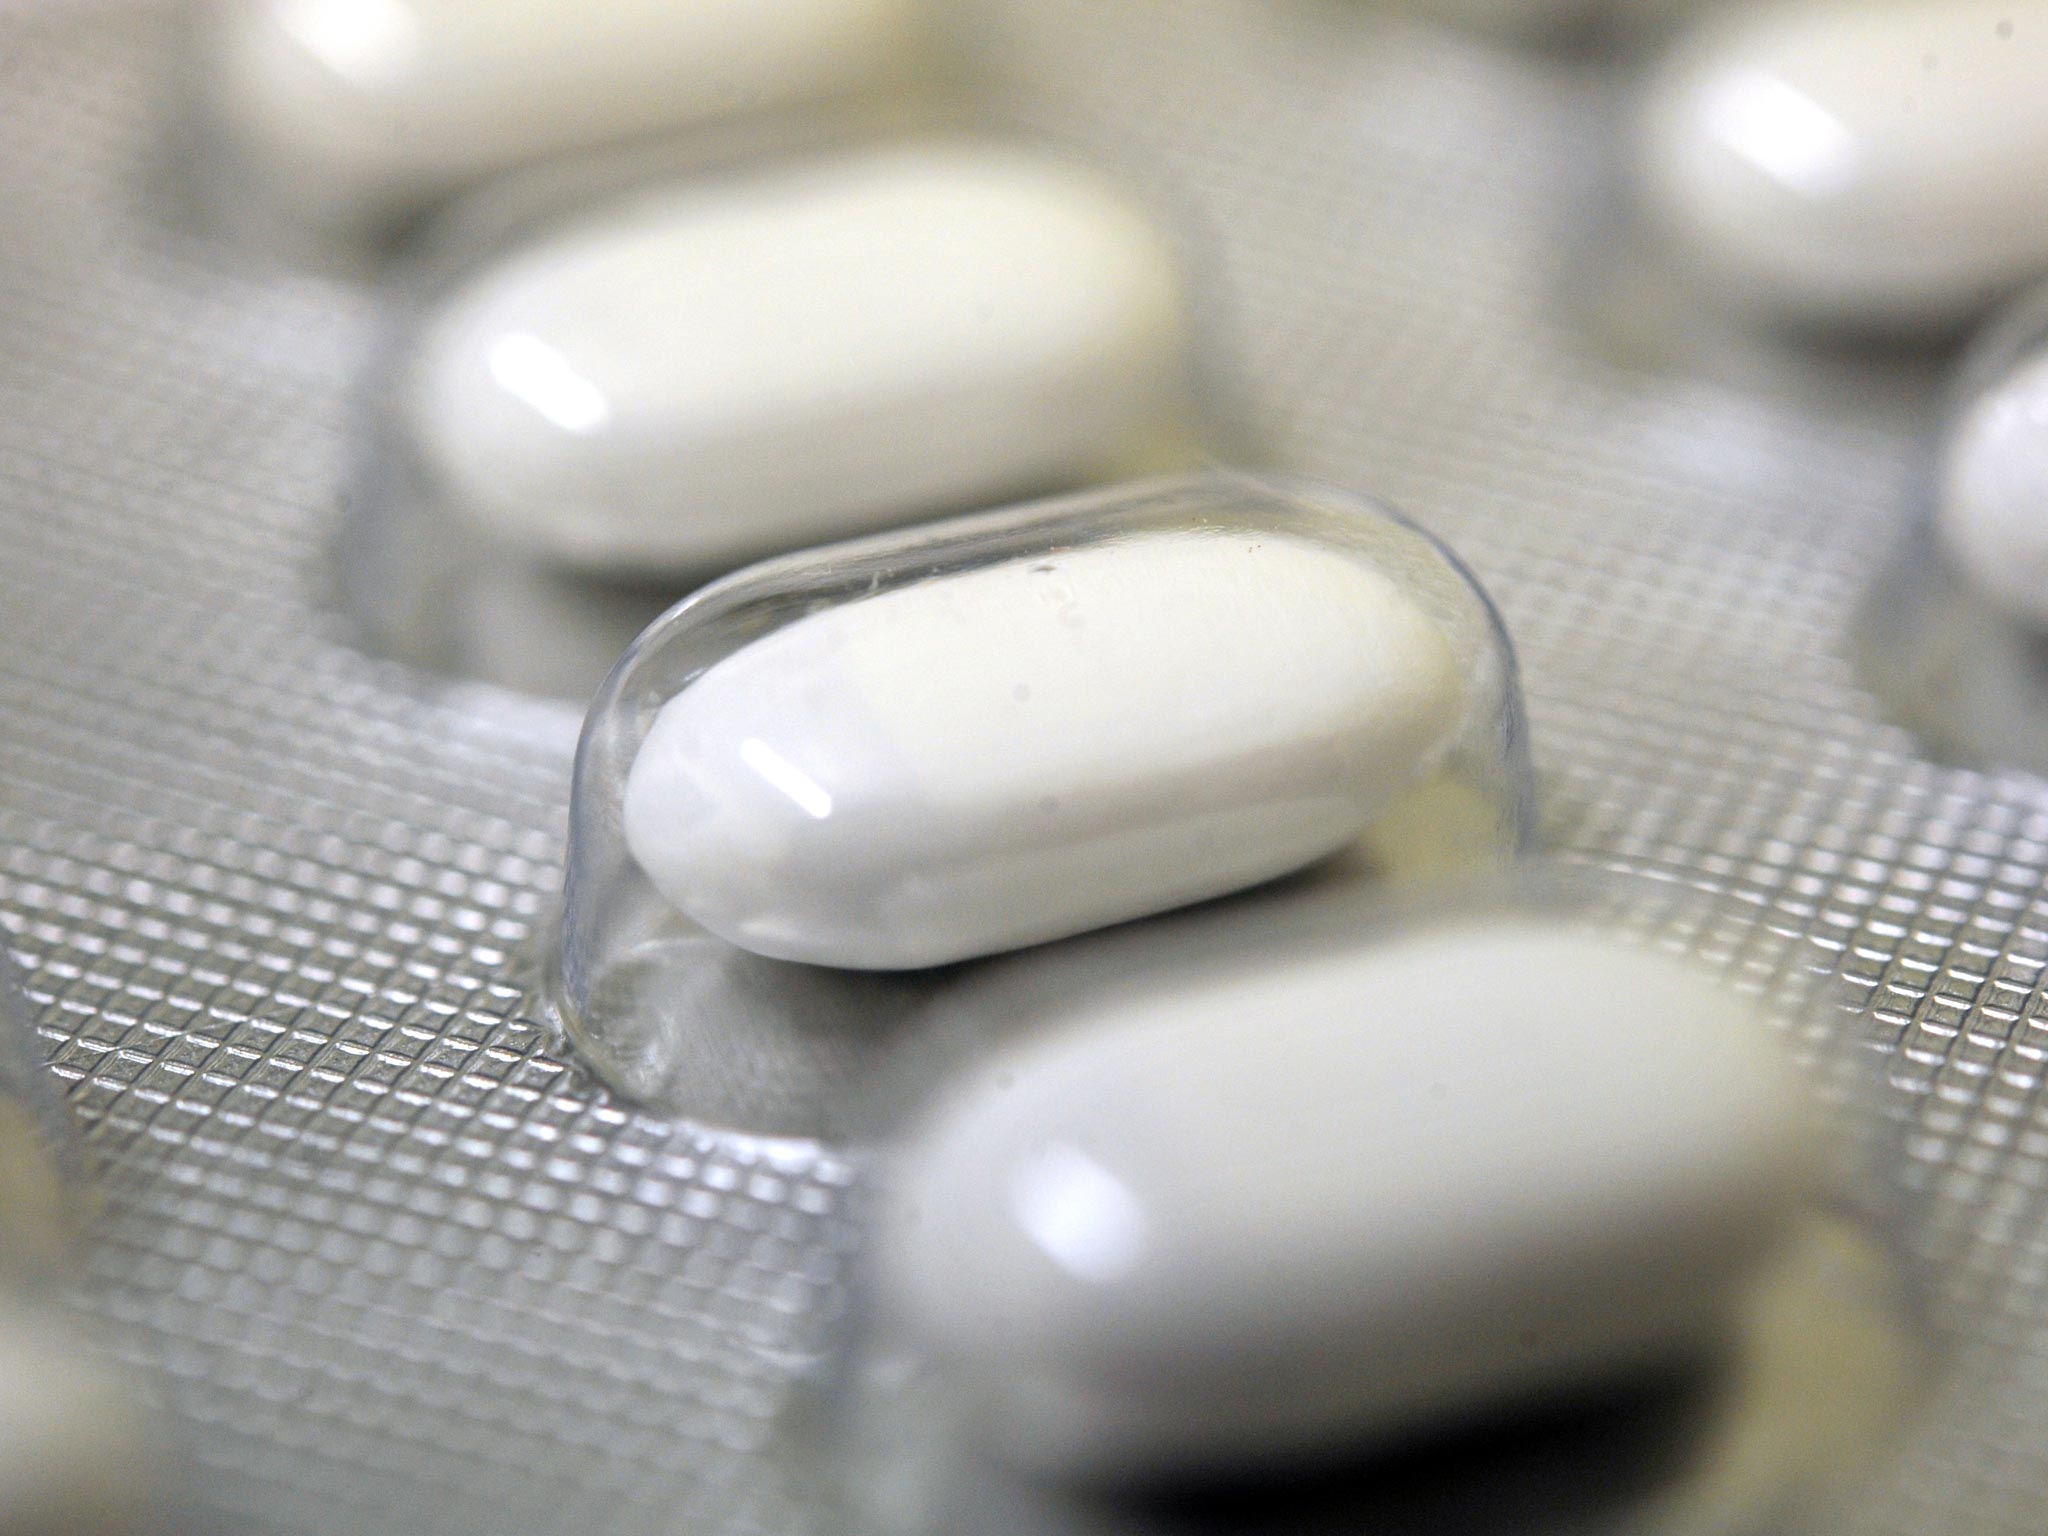 Paracetamol can be purchased in shops for as little as 19p